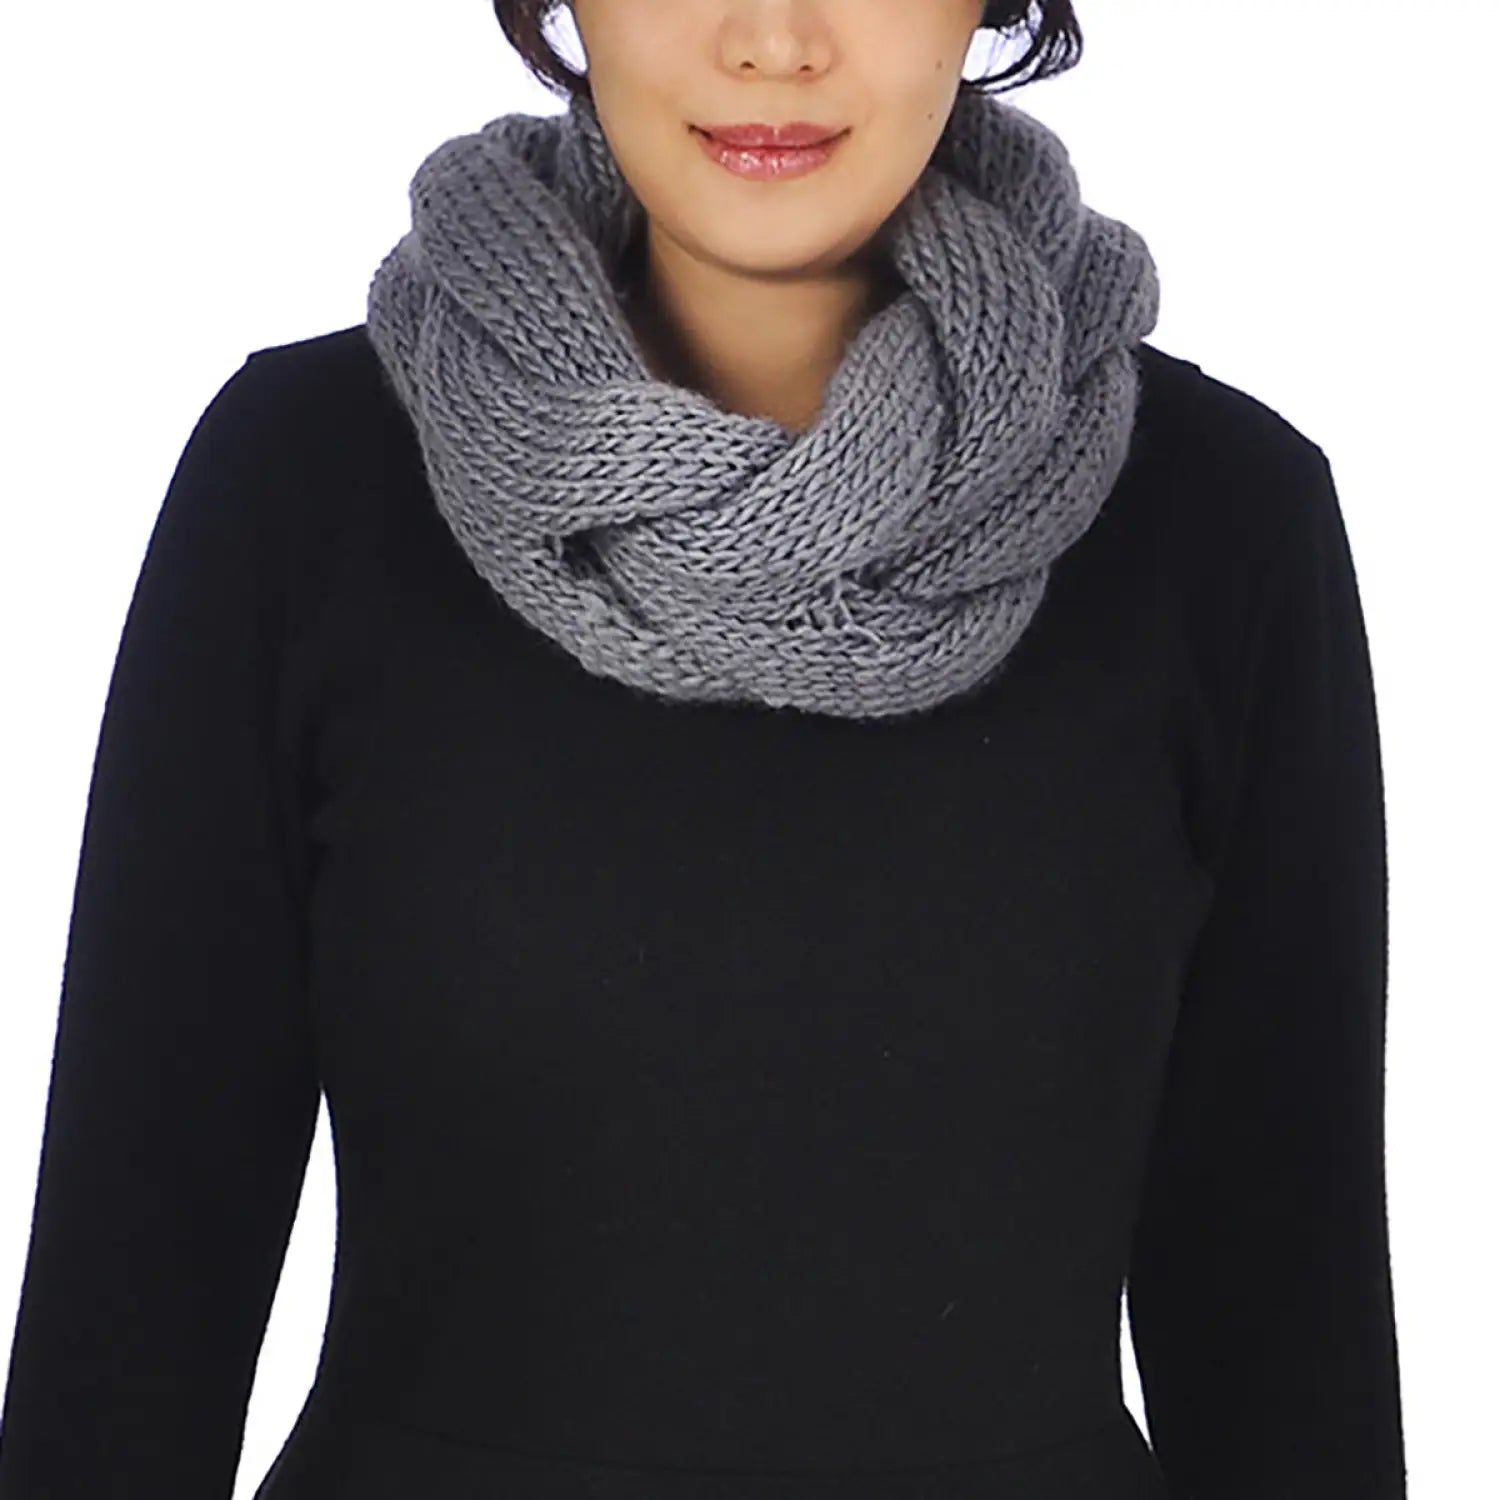 Chunky plait knitted cowl scarf for Autumn & Winter